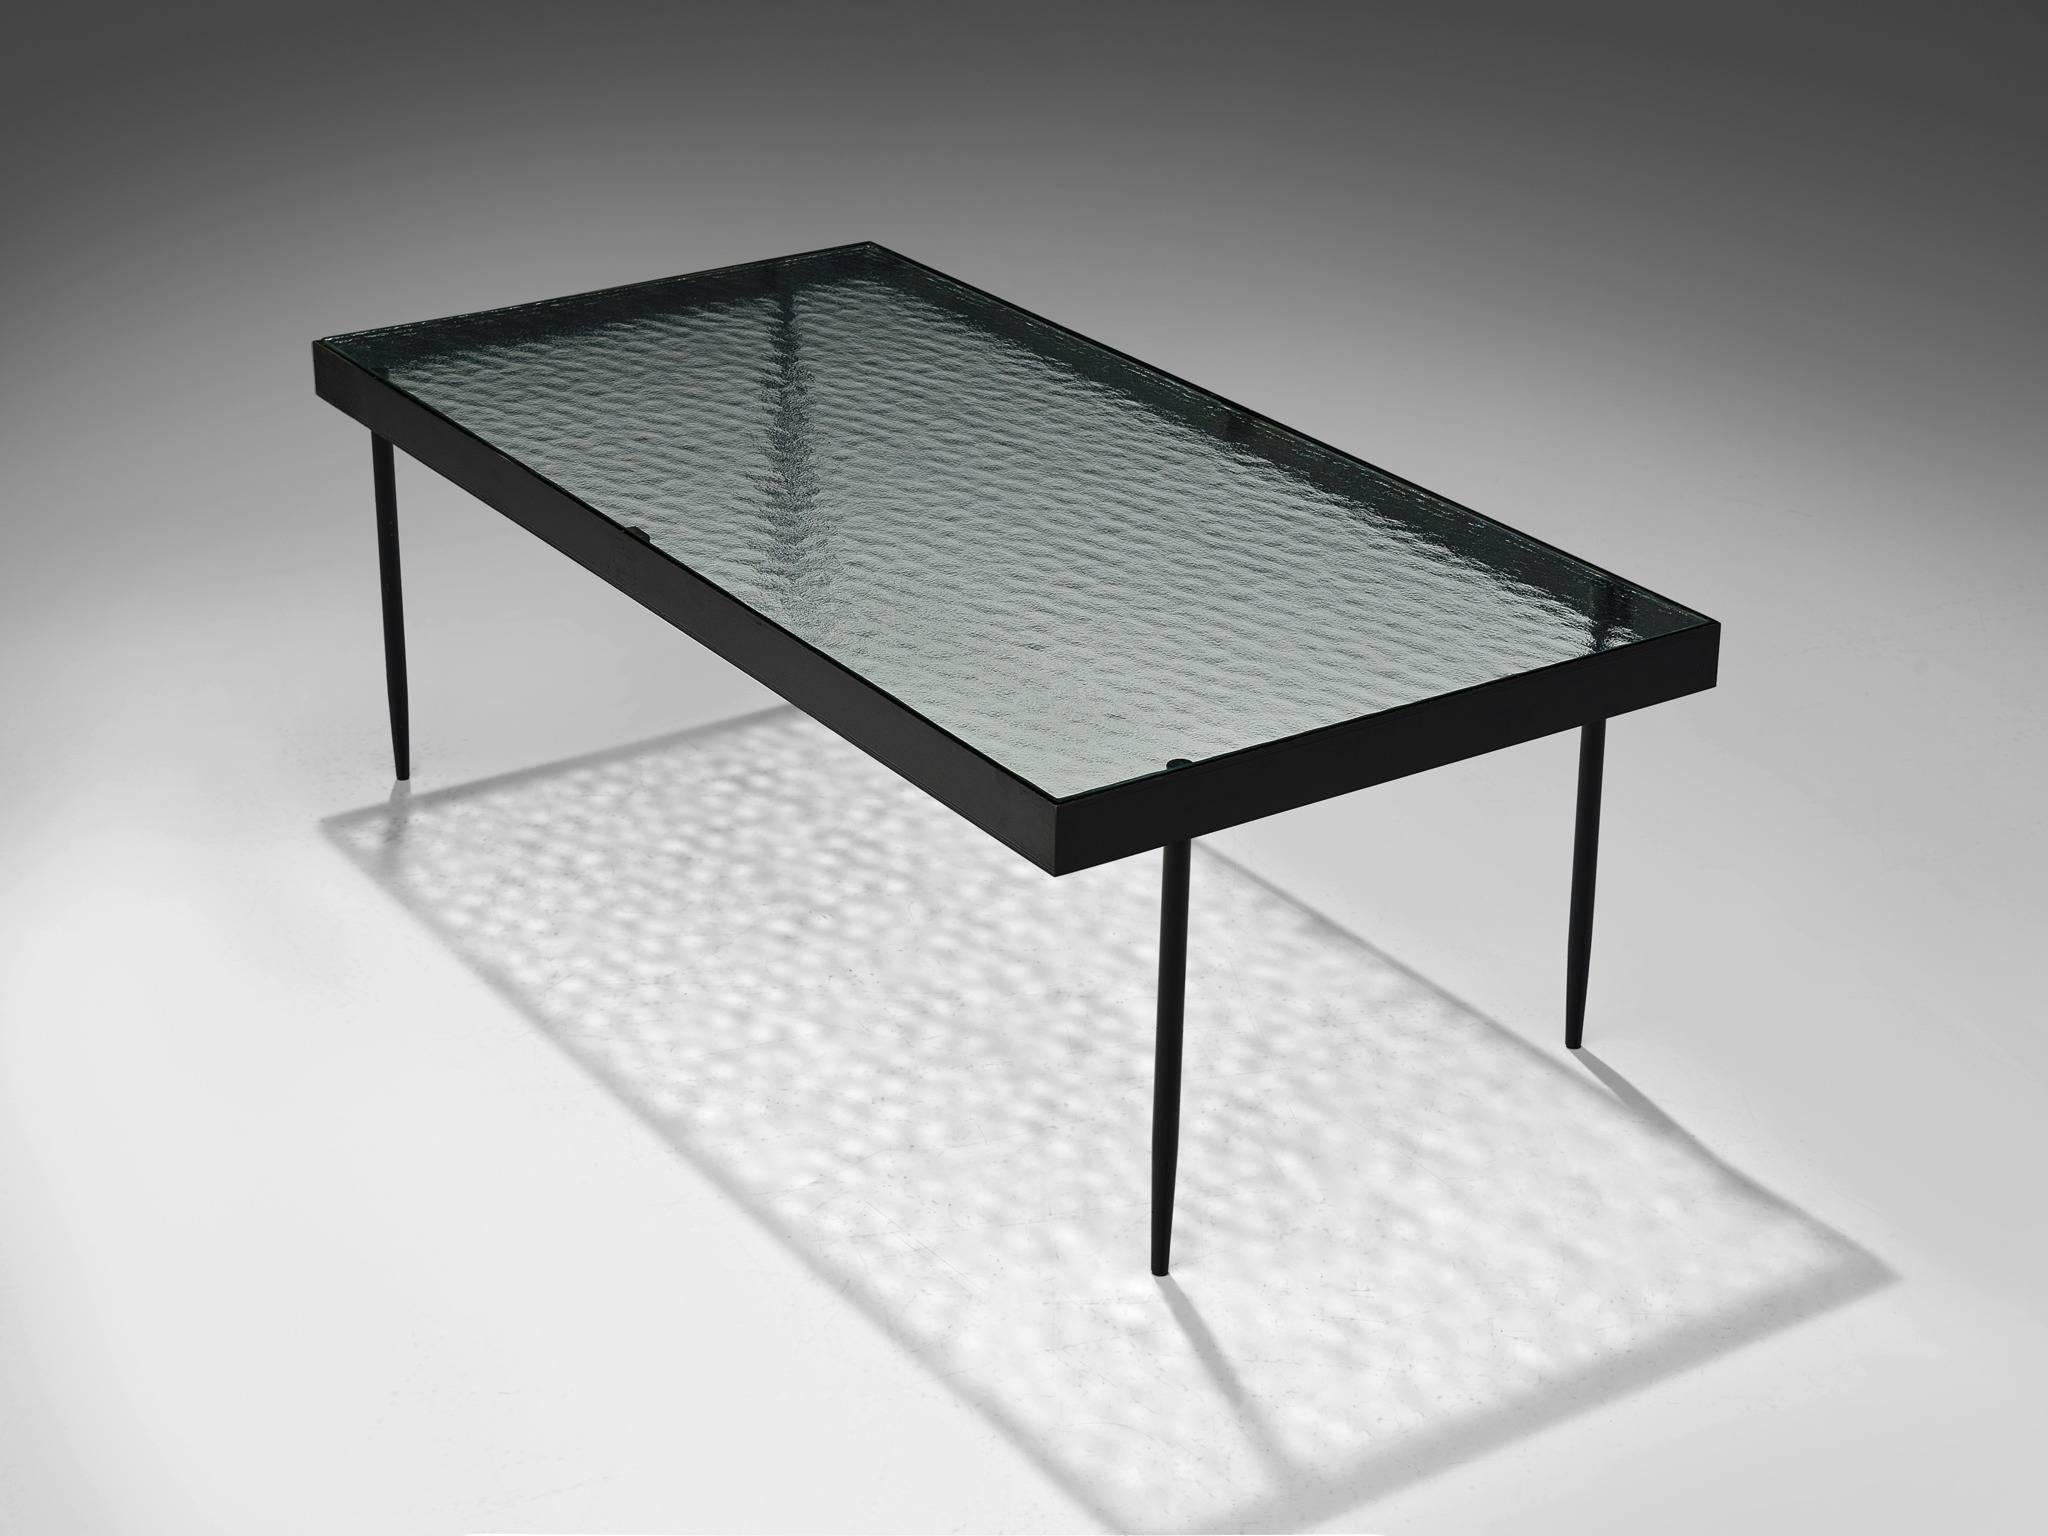 Janni van Pelt for Bas van Pelt, coffee table, glass, metal, Netherlands, 1958. 

This is a rare rectangular coffee table is designed by Janni van Pelt for Bas van Pelt. The table is made from reinforced glass with delicate tapered legs and a black